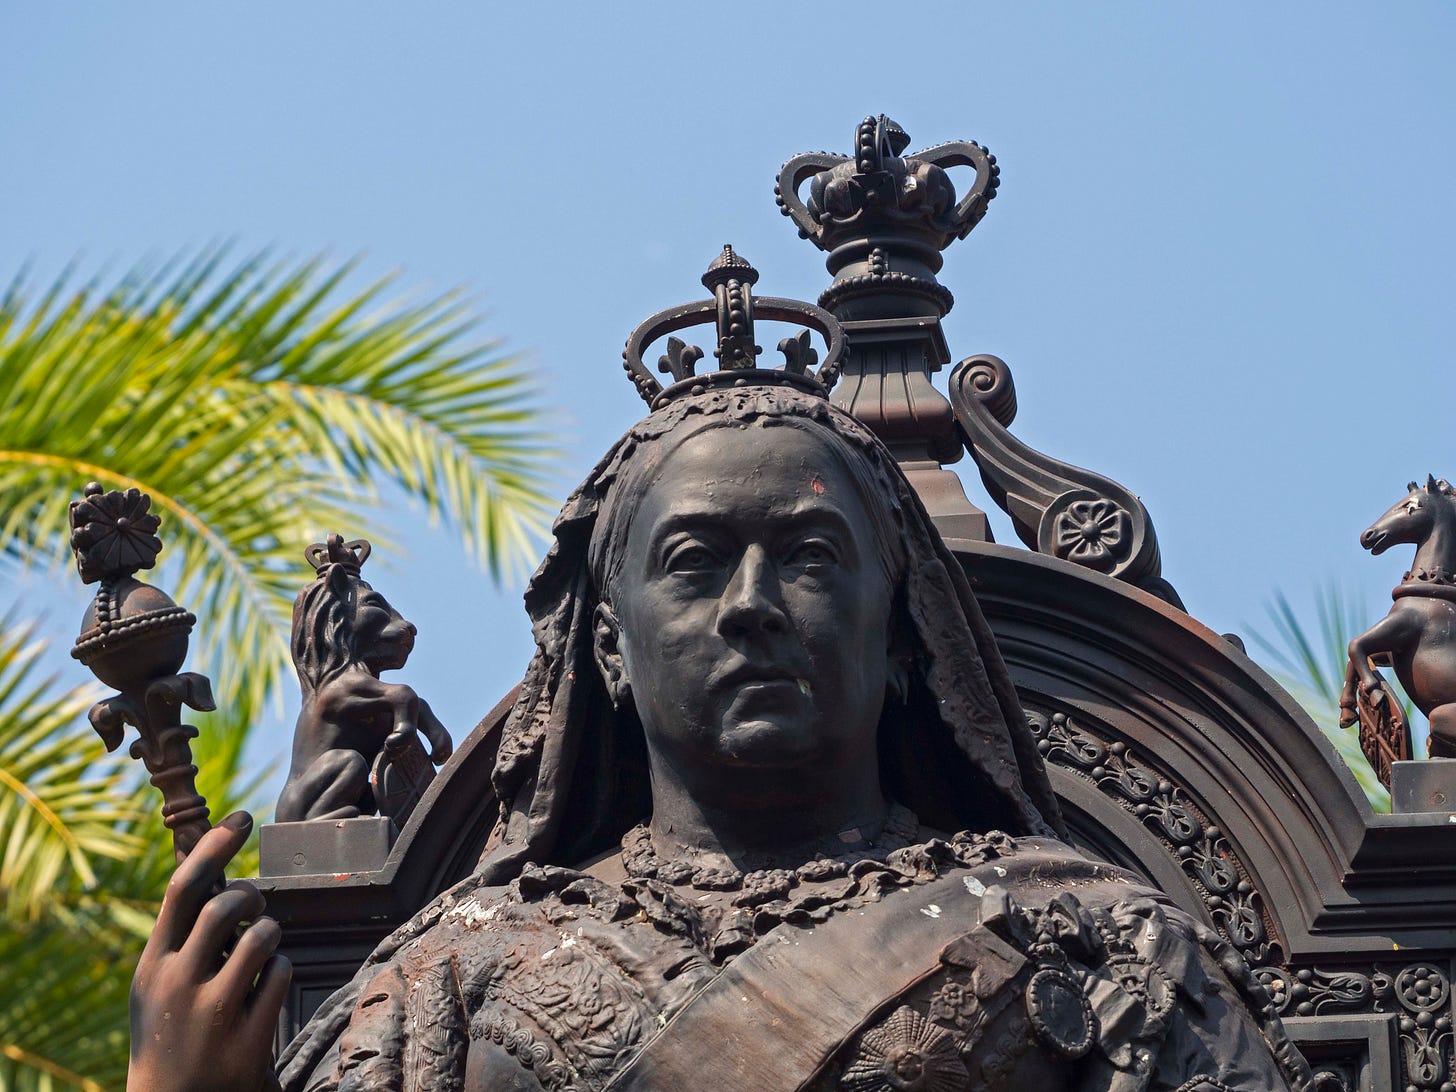 https://www.thestandard.com.hk/section-news/section/11/175706/Historic-statue-loses-true-color-after-%27chocolate%27-paint-job